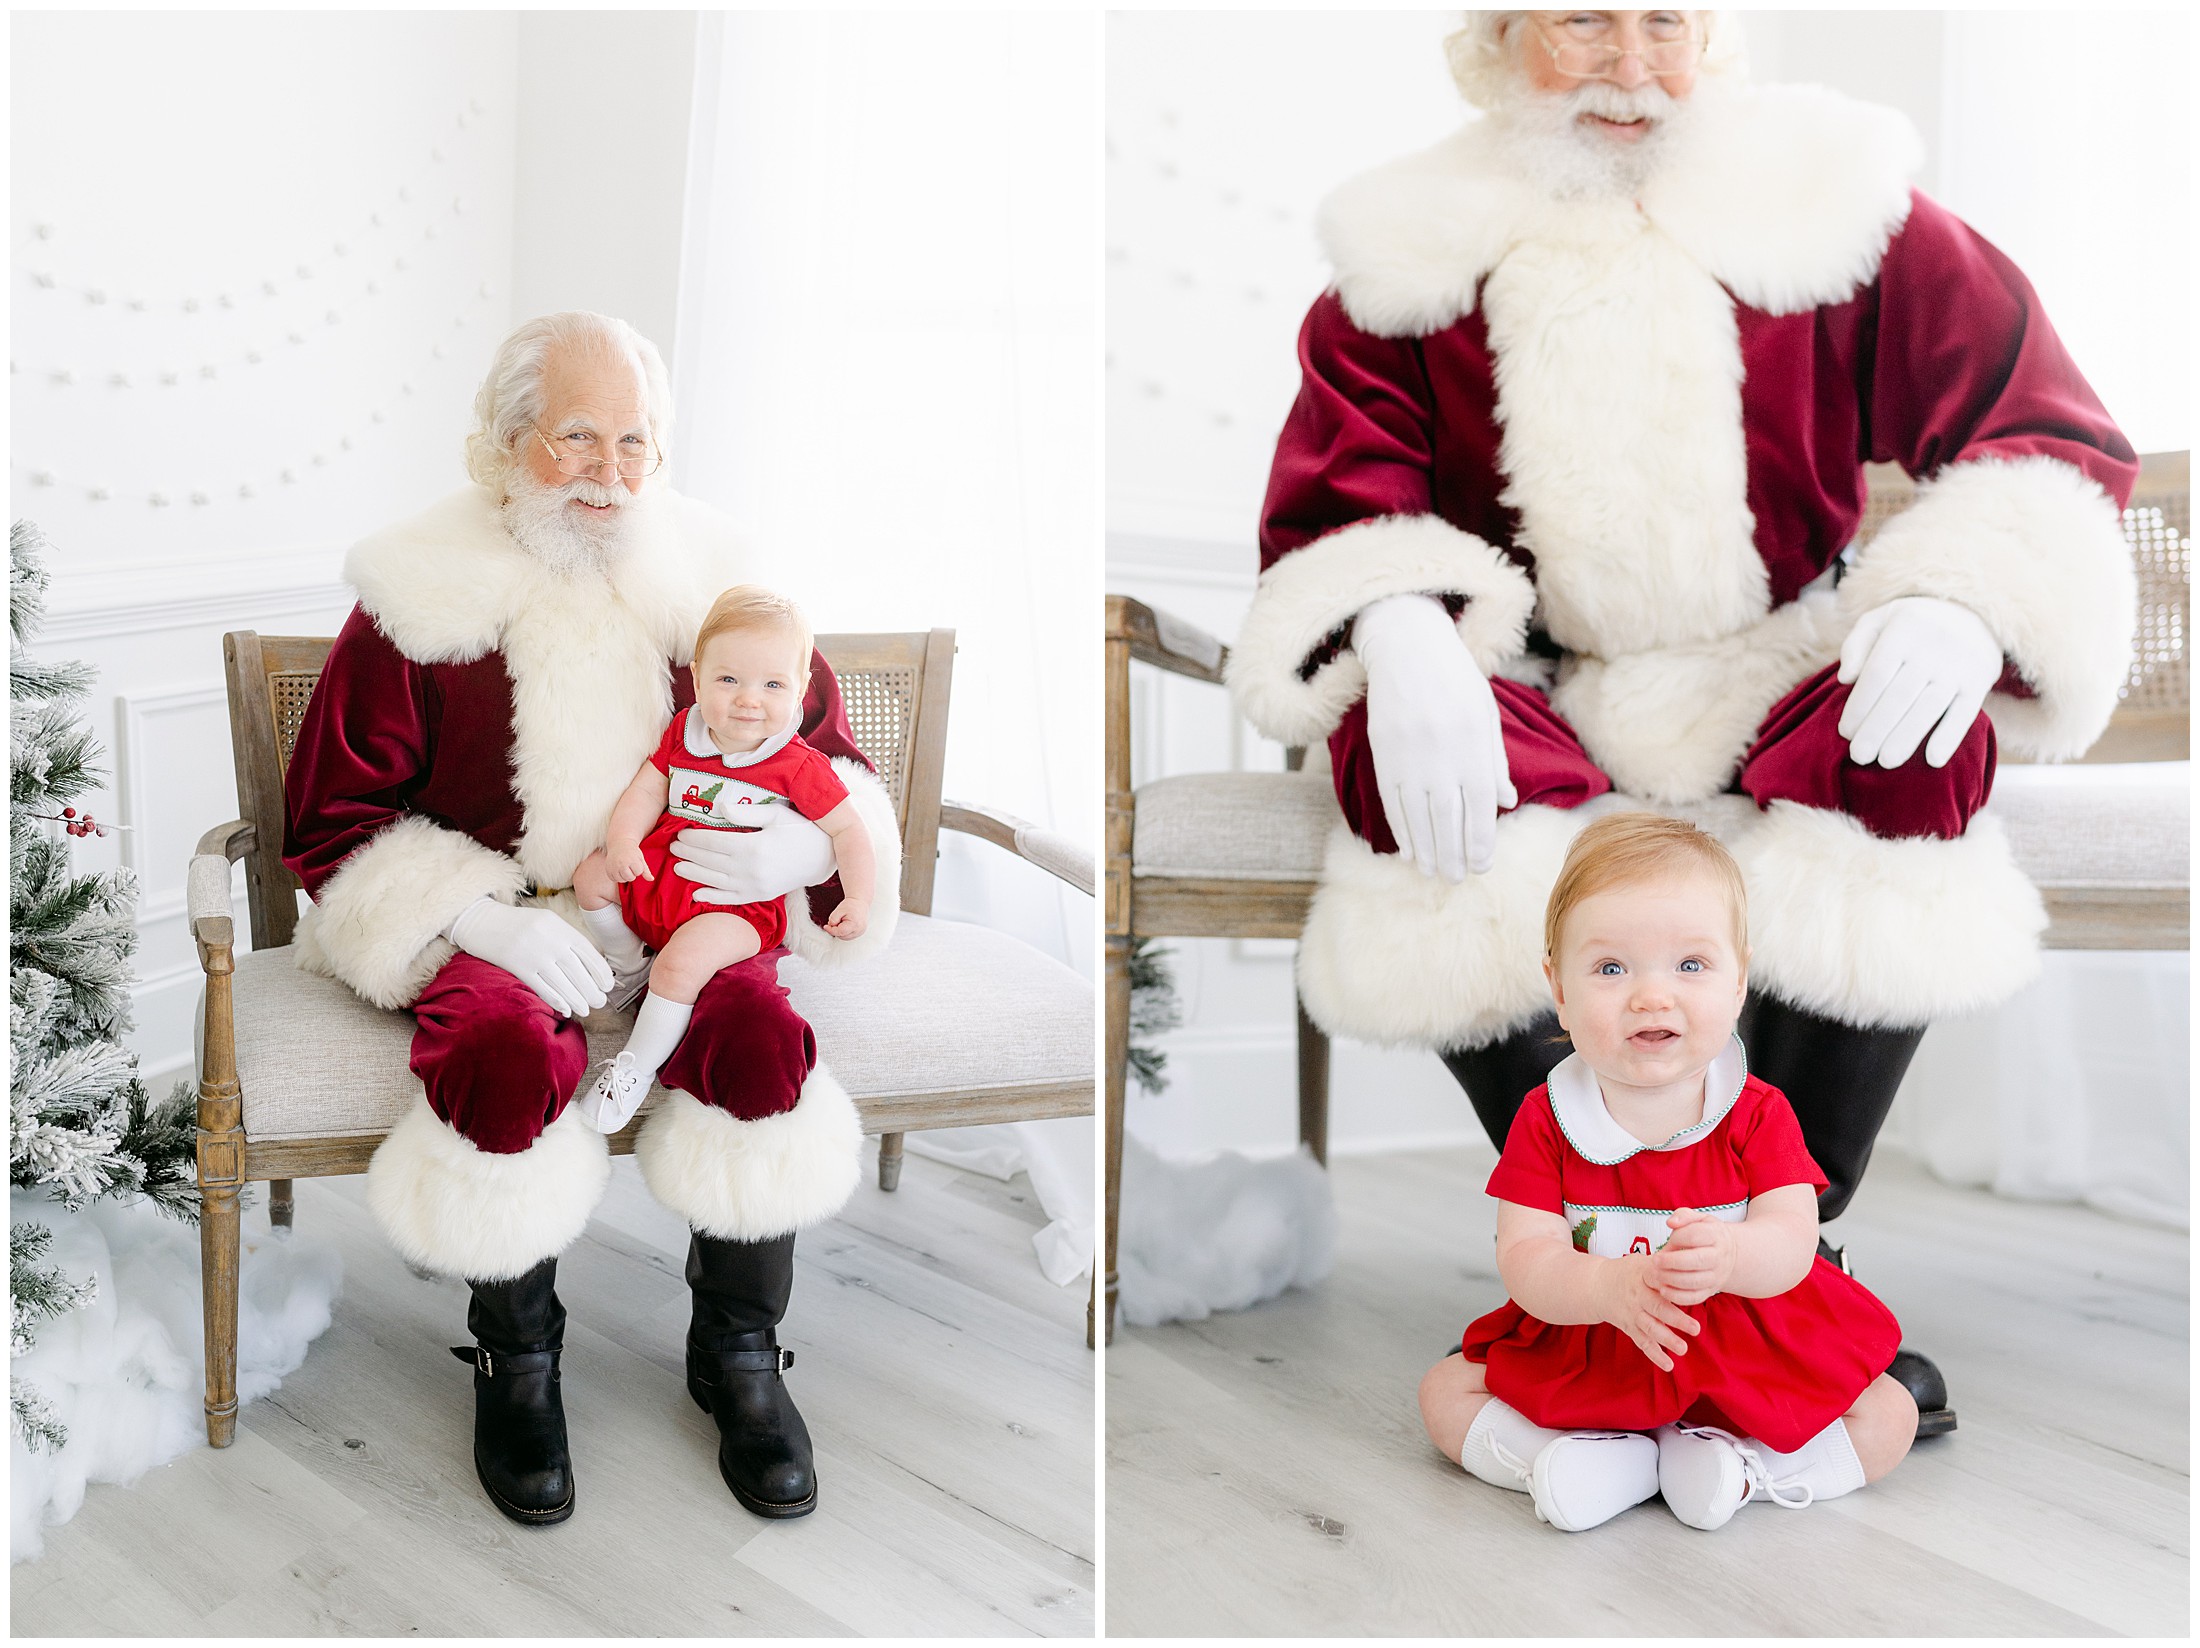 Two photos of a baby smiling while sitting in front of Santa's boots on on his lap.